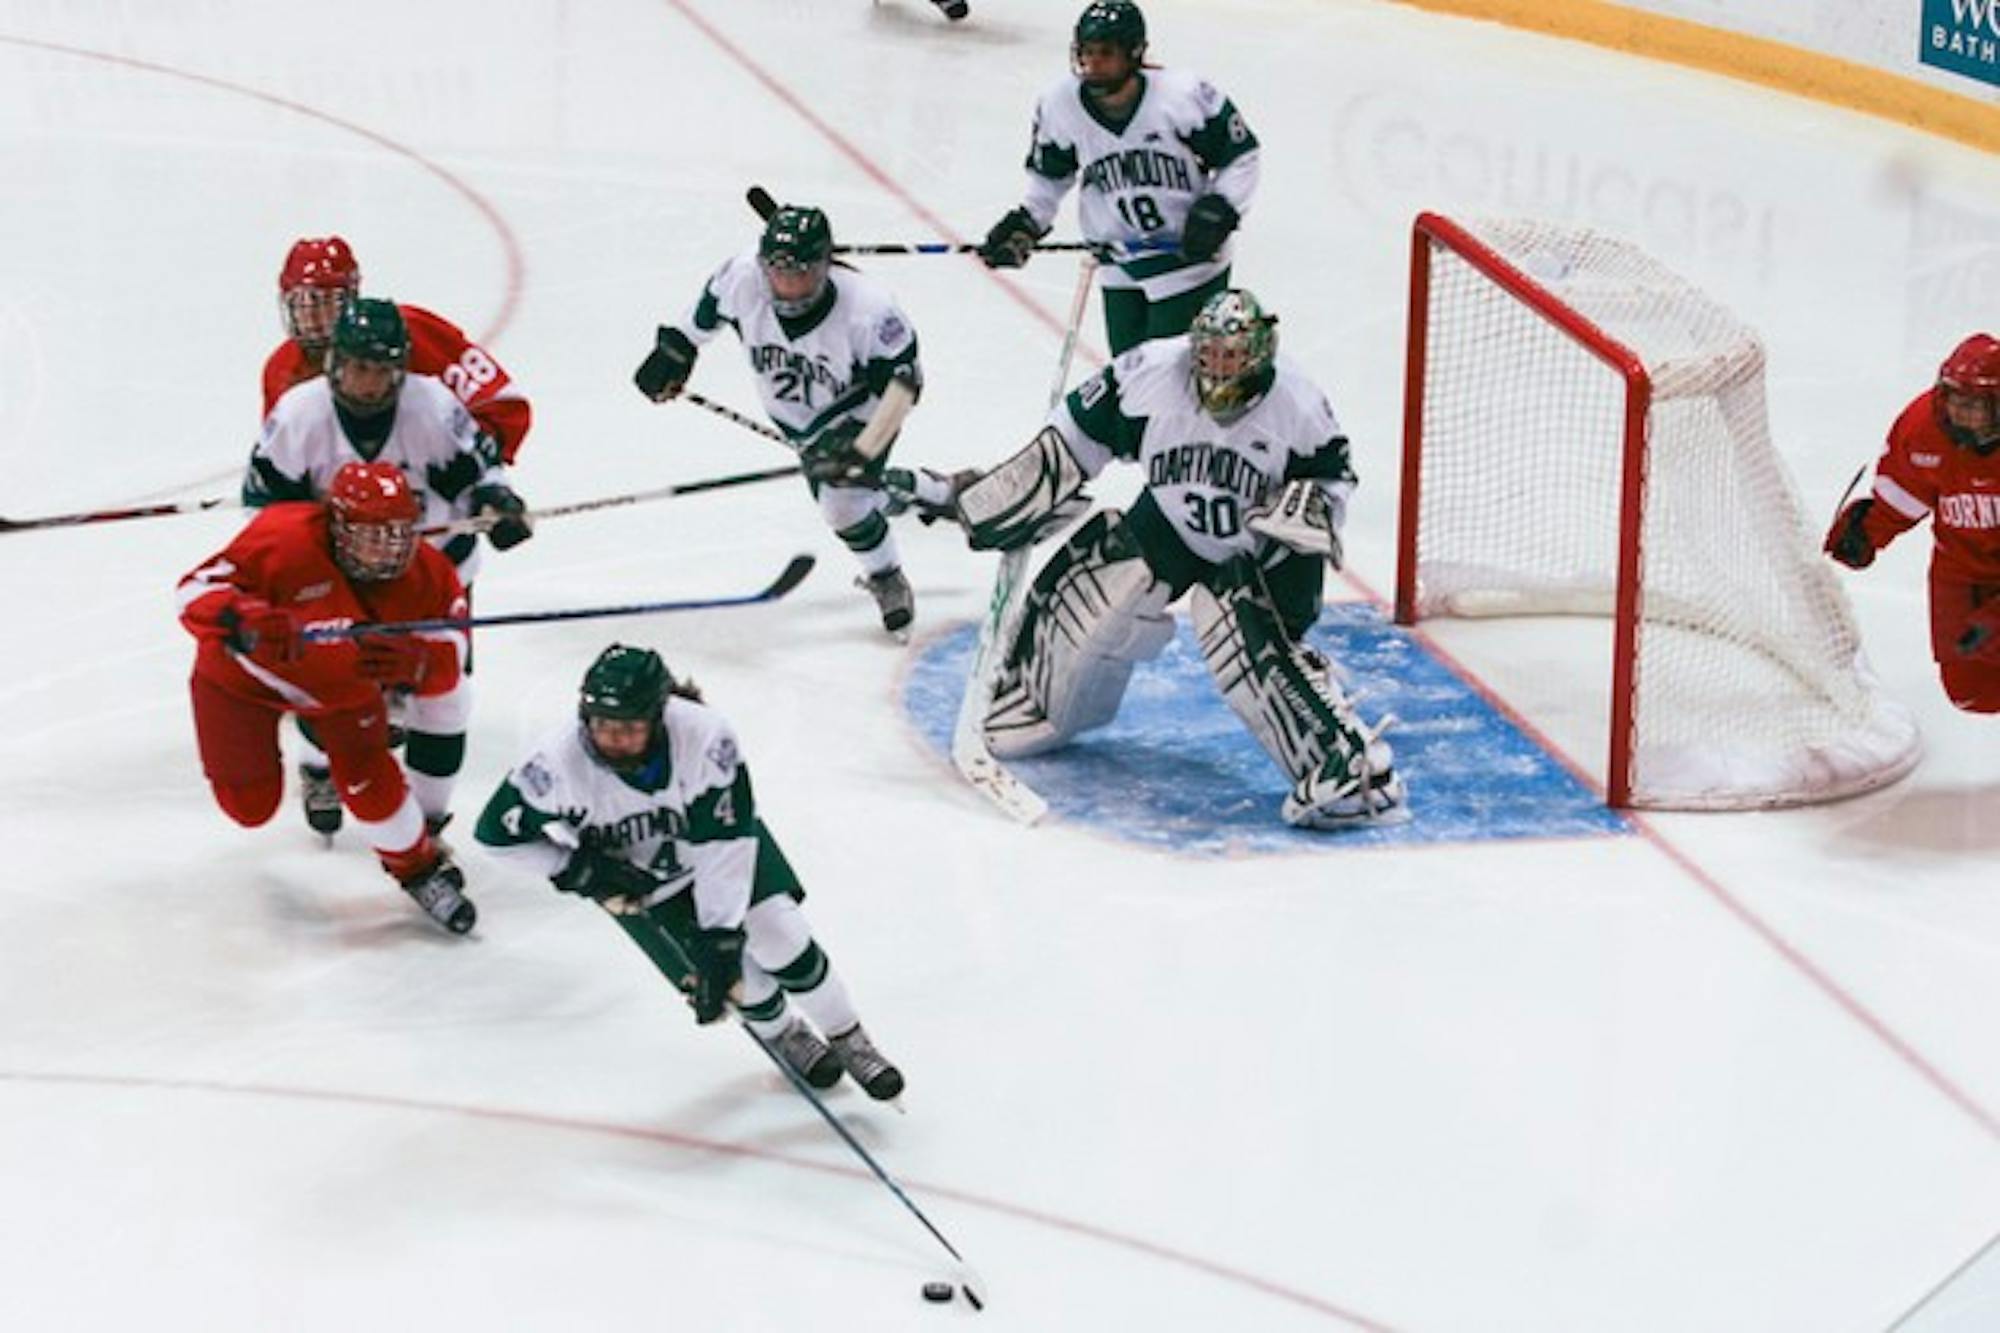 Dartmouth, currently ranked No. 5 in the nation, is 1-3 against top 10 opponents after two losses to No. 4 UMD.